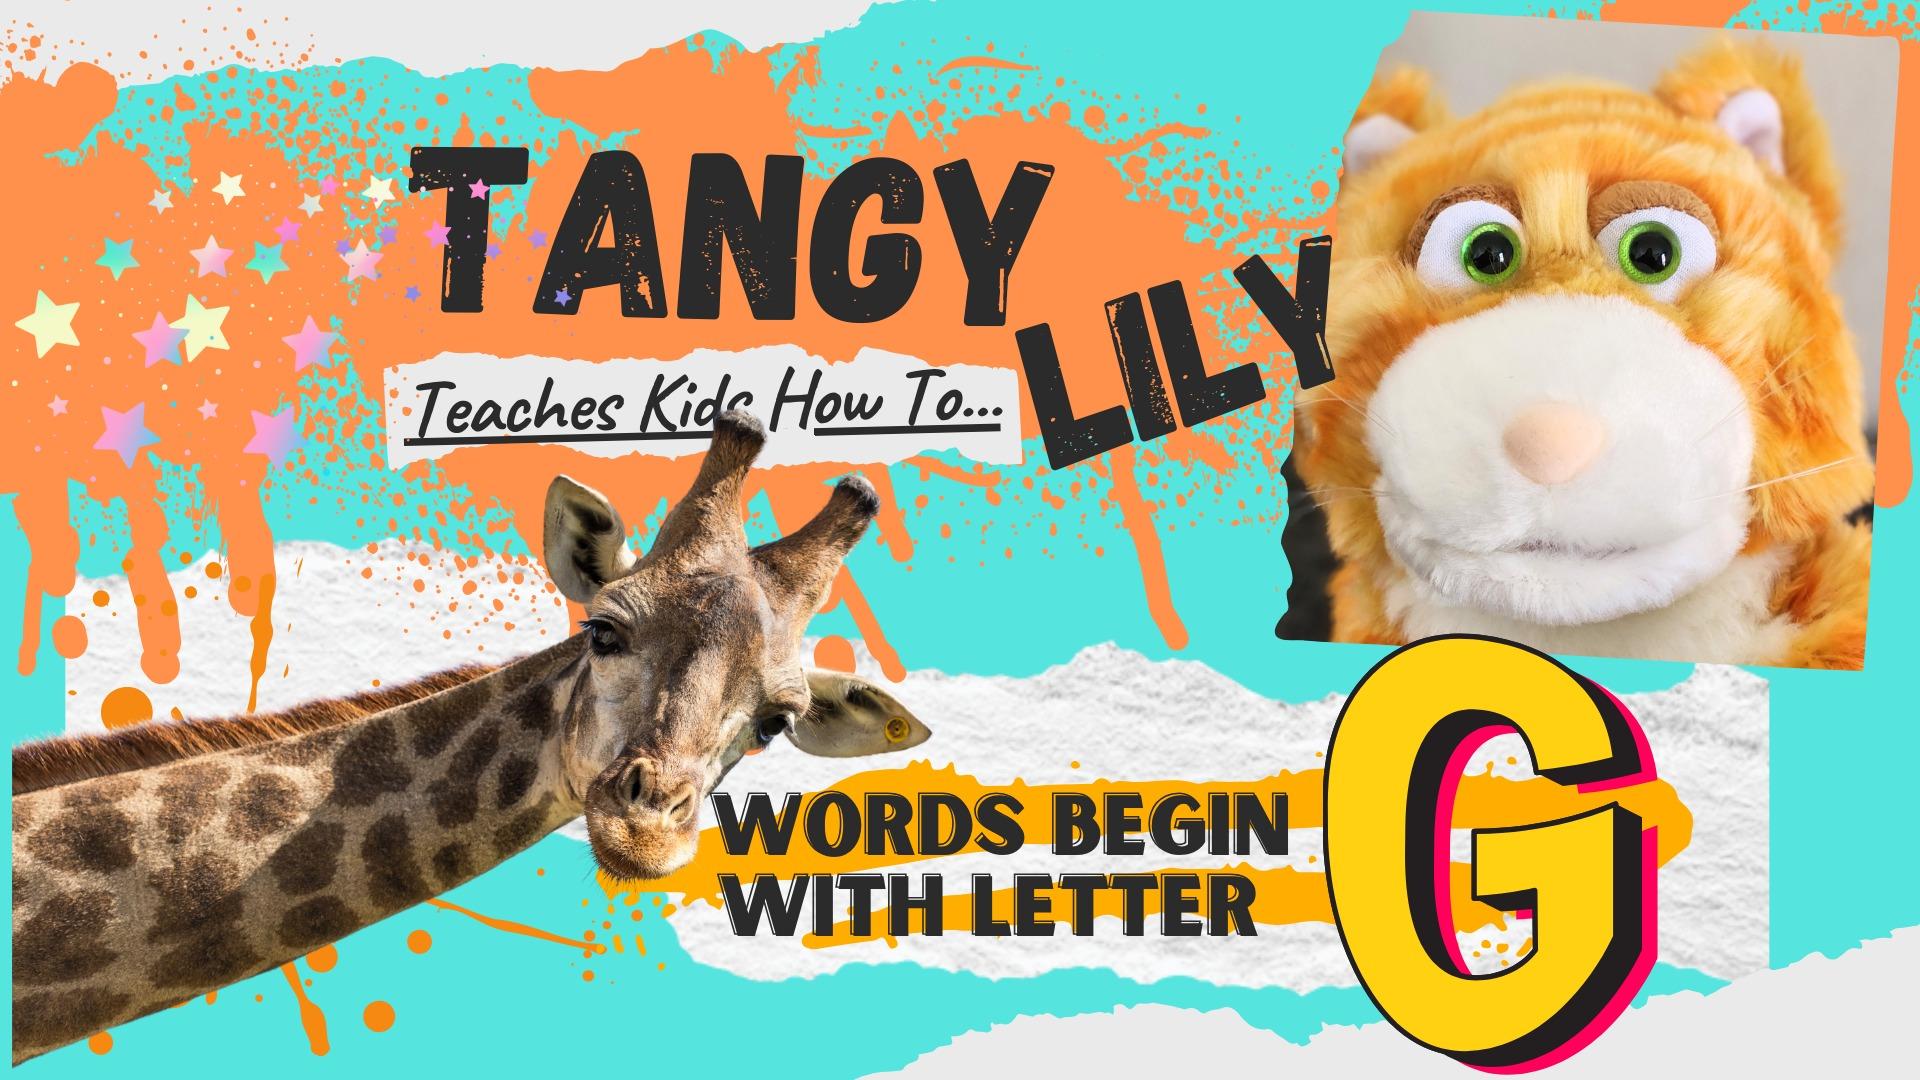 What Words Start With The Letter G? Real Life Animals and Objects